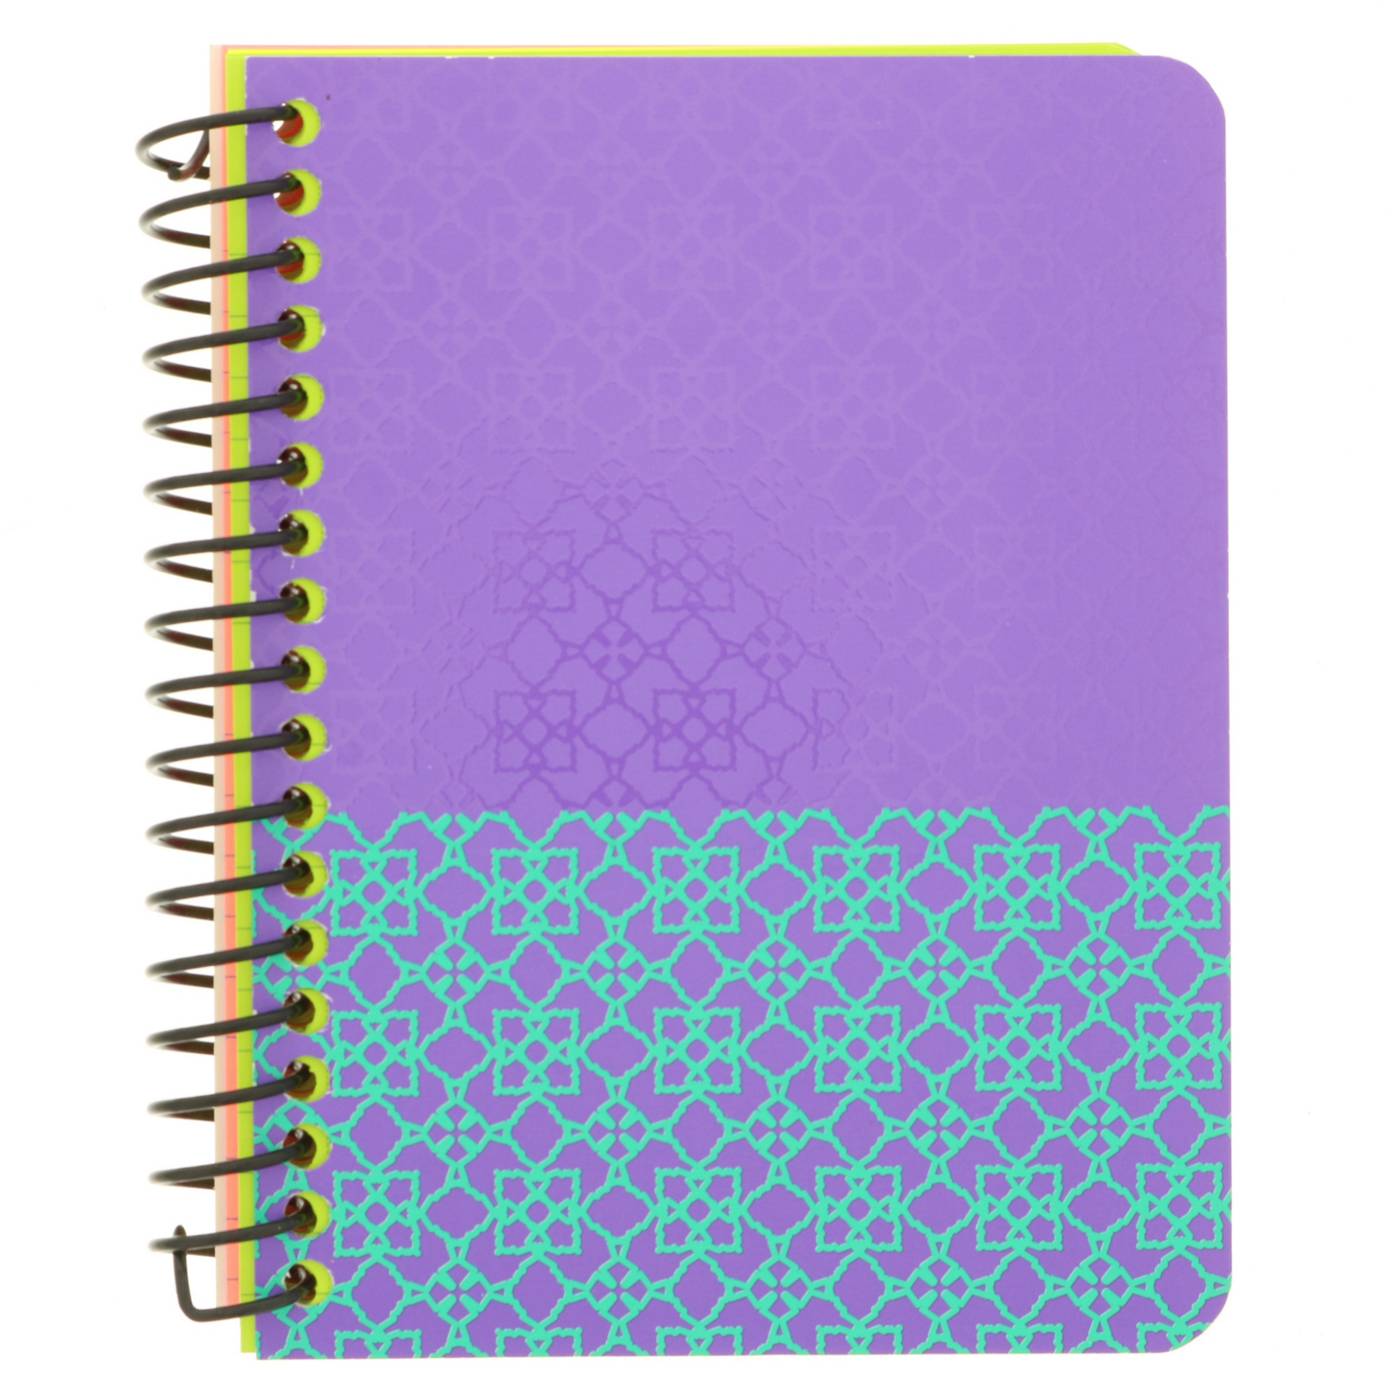 Top Flight Neon Fashion Mini Notebook Assorted; image 3 of 4